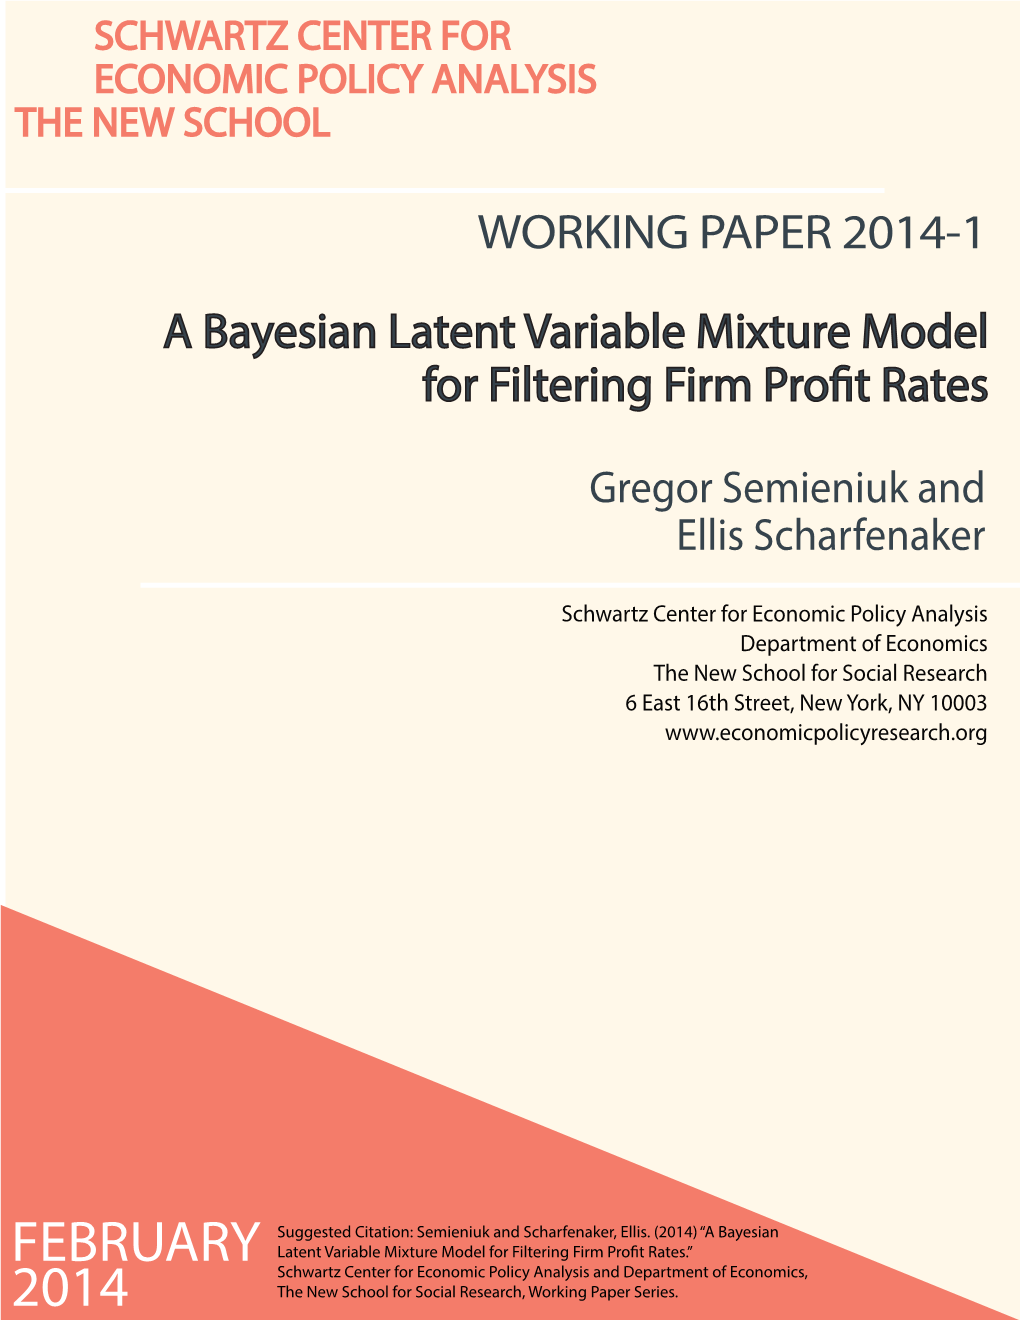 A Bayesian Latent Variable Mixture Model for Flitering Firm Profit Rates